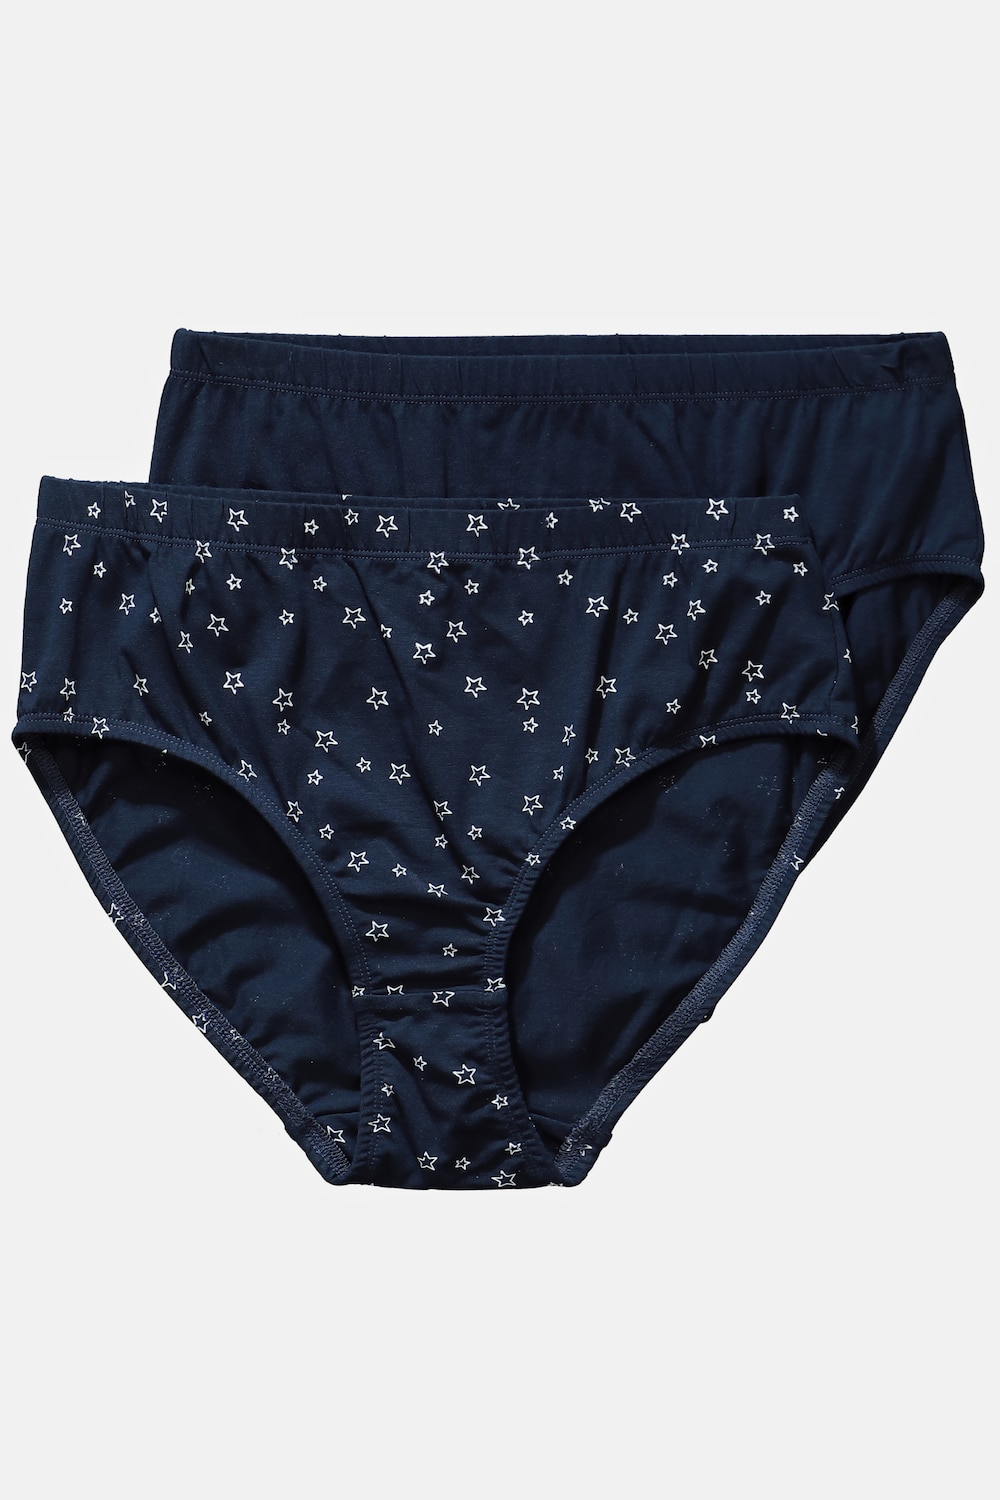 2 Pack of Eco Cotton Stretch Panties - Stars, Solid